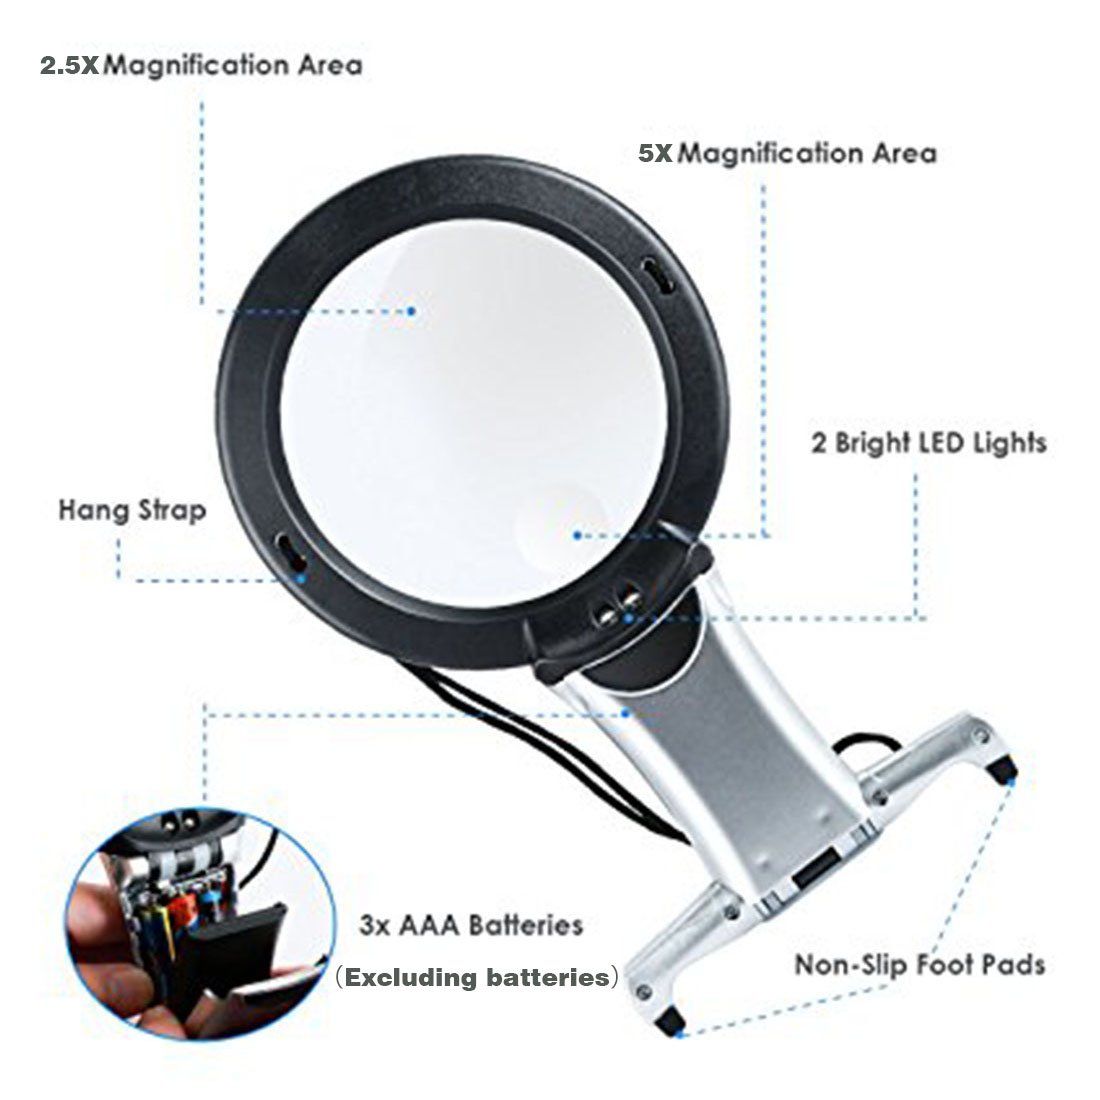 Lighted 6X/2X Magnifying Glass for Close Work, Reading Magnifier for ...